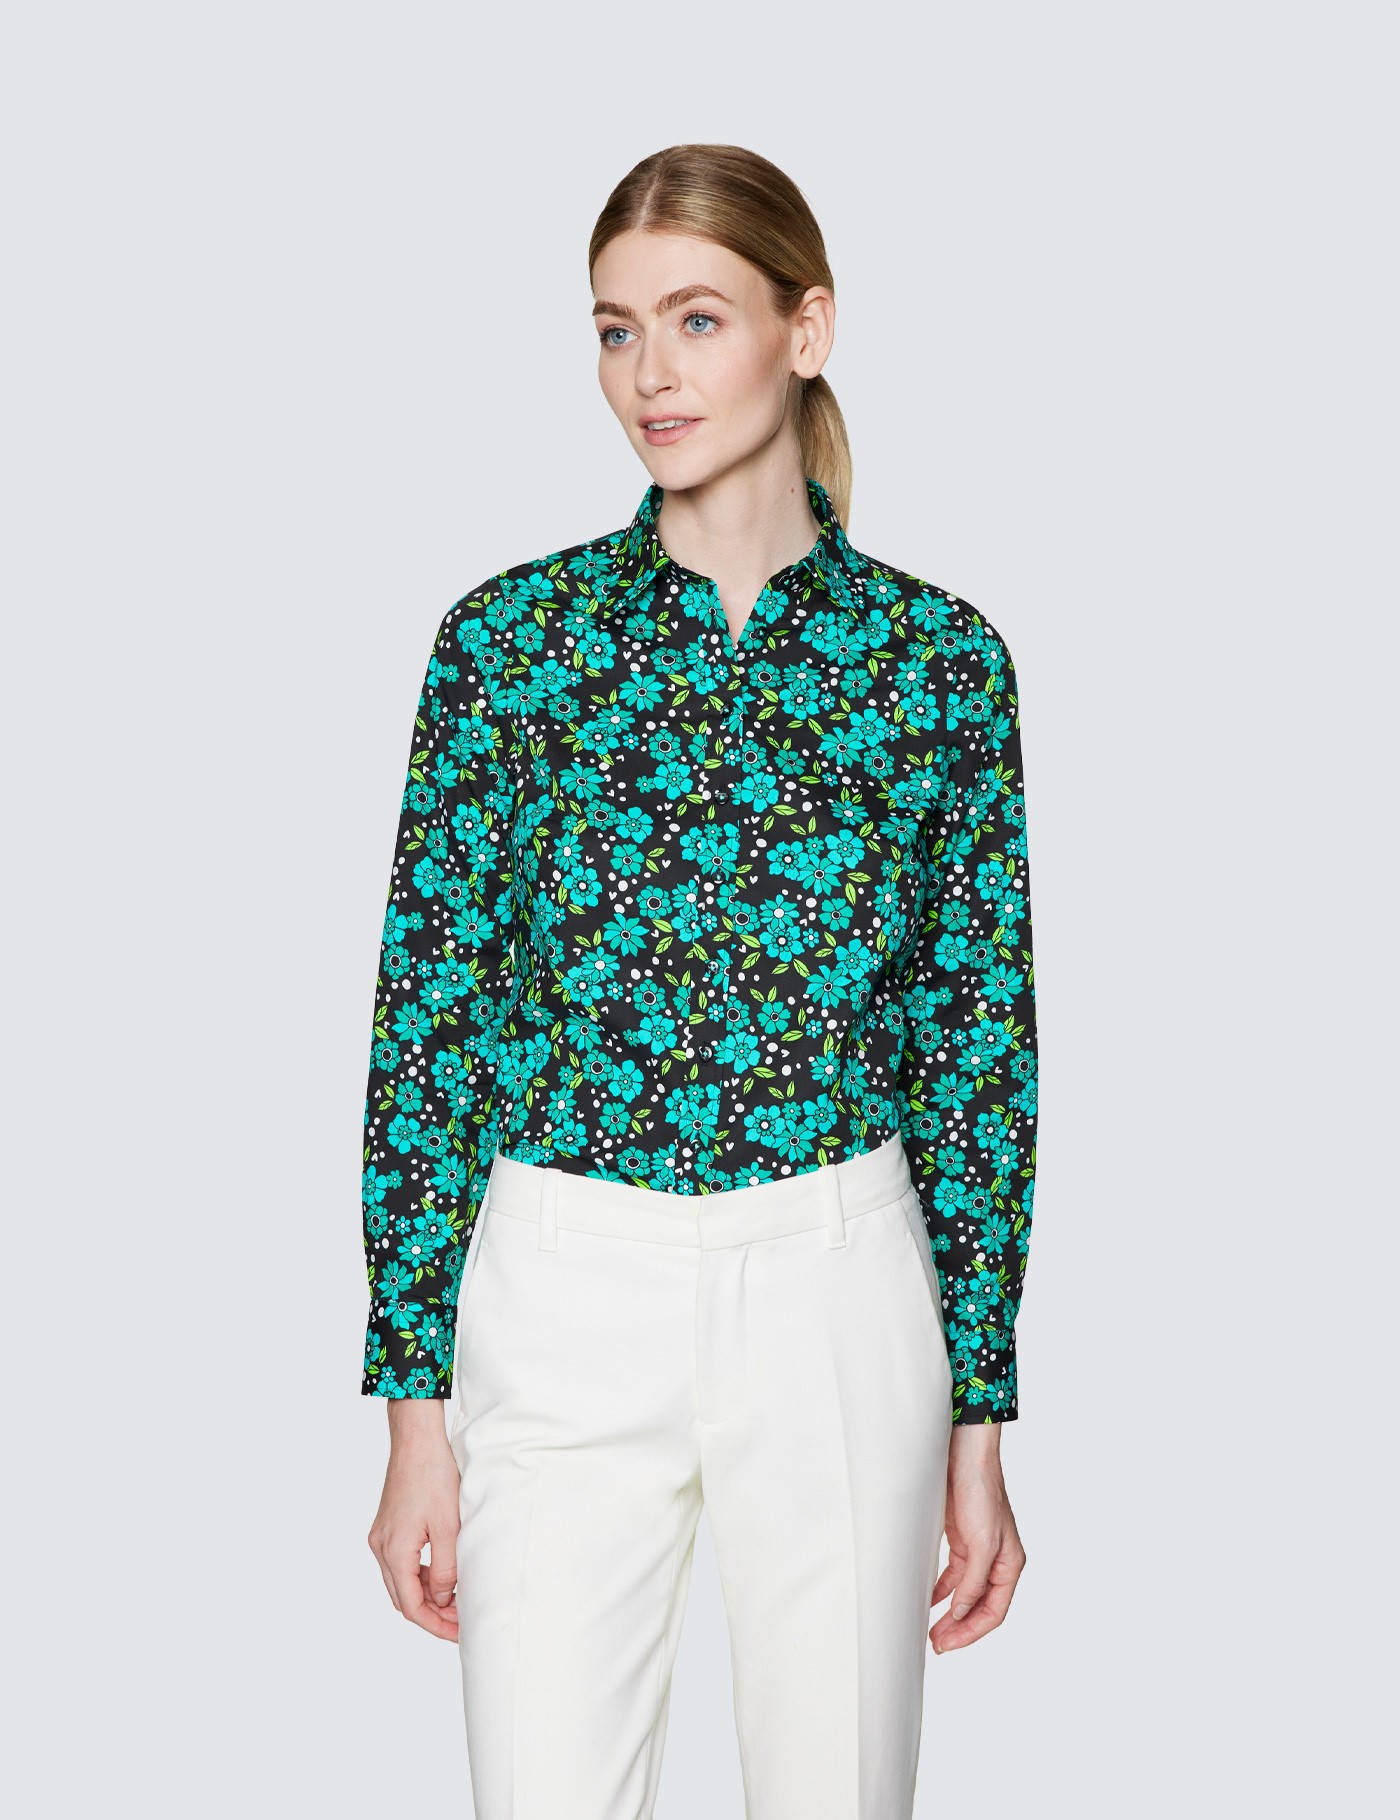 Women's Black & Green Floral Print Semi Fitted Shirt